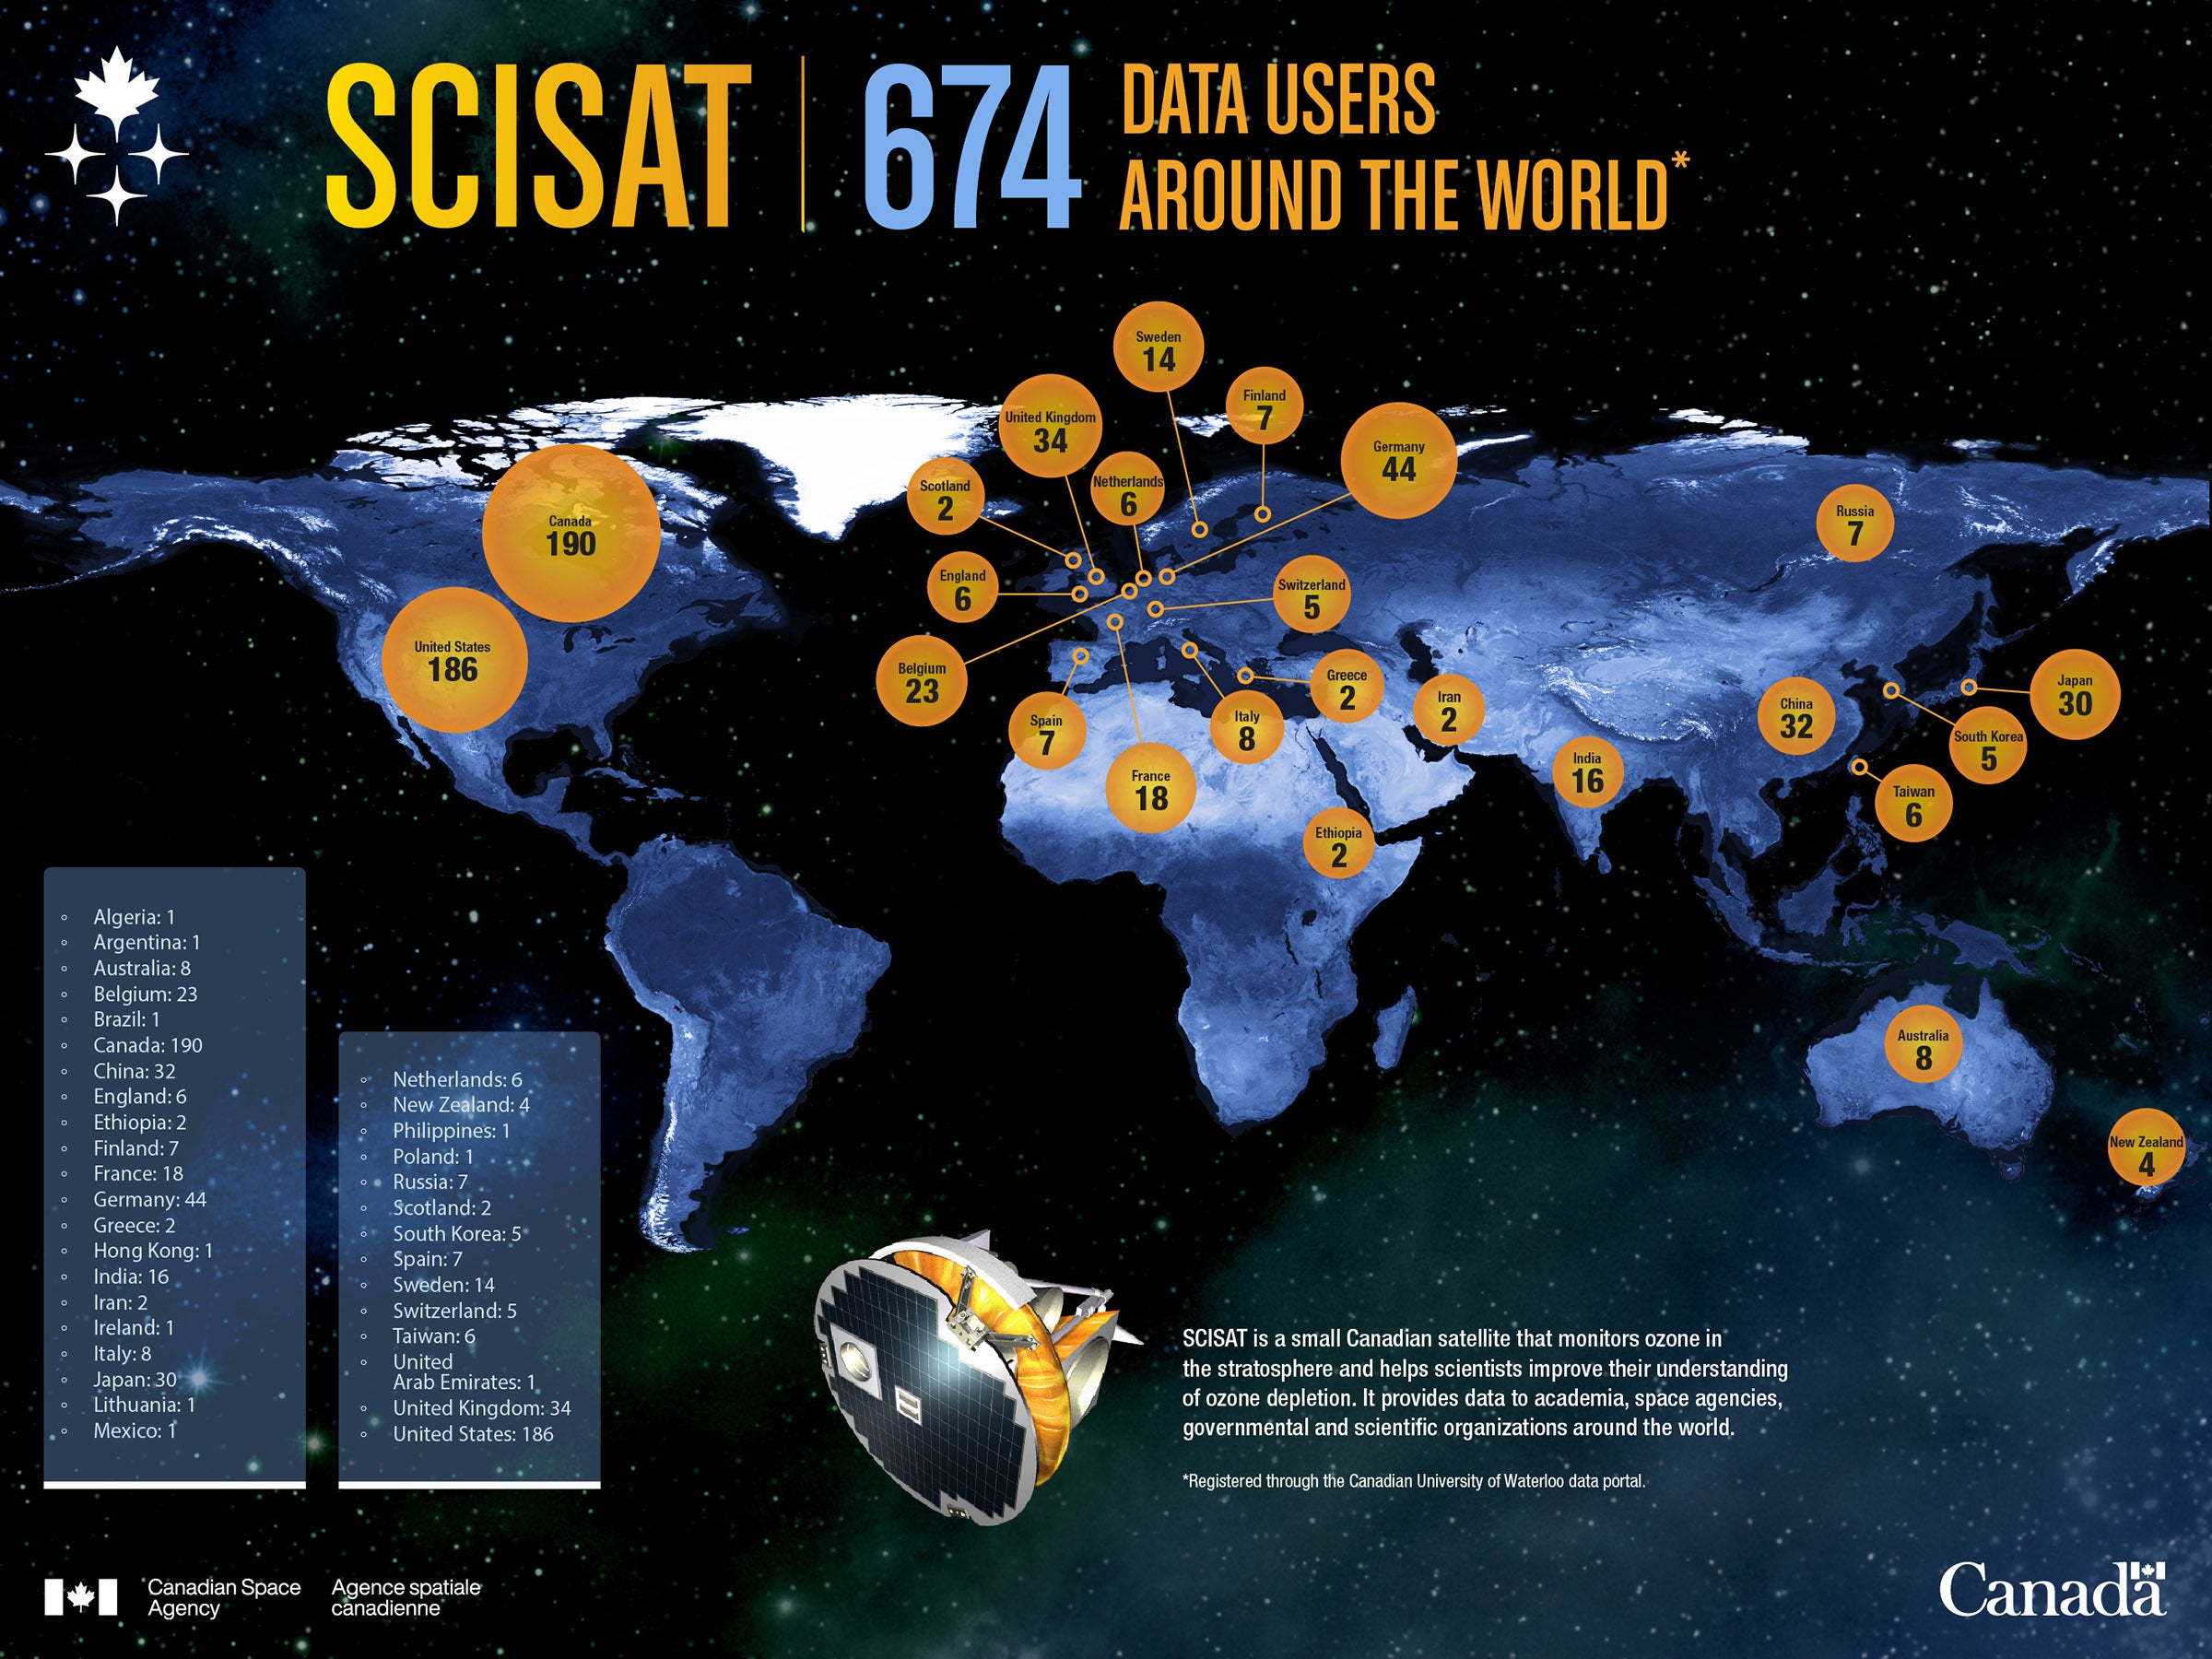 Canadian Space Agency's SCISAT data users infographic